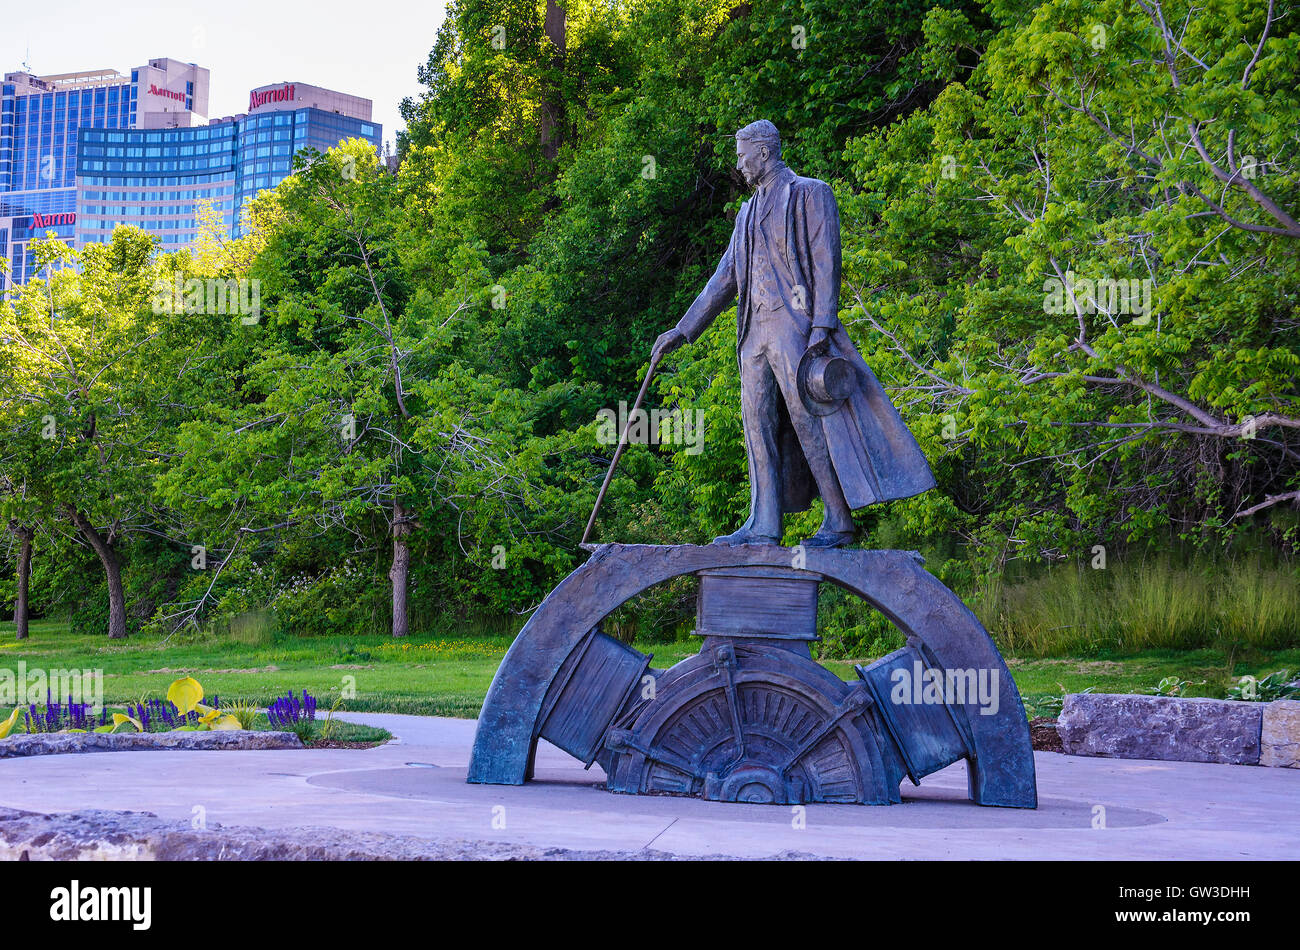 The statue of Nikola Tesla, a Serbian American inventor, electrical & mechanical engineer, physicist and futurist. Stock Photo